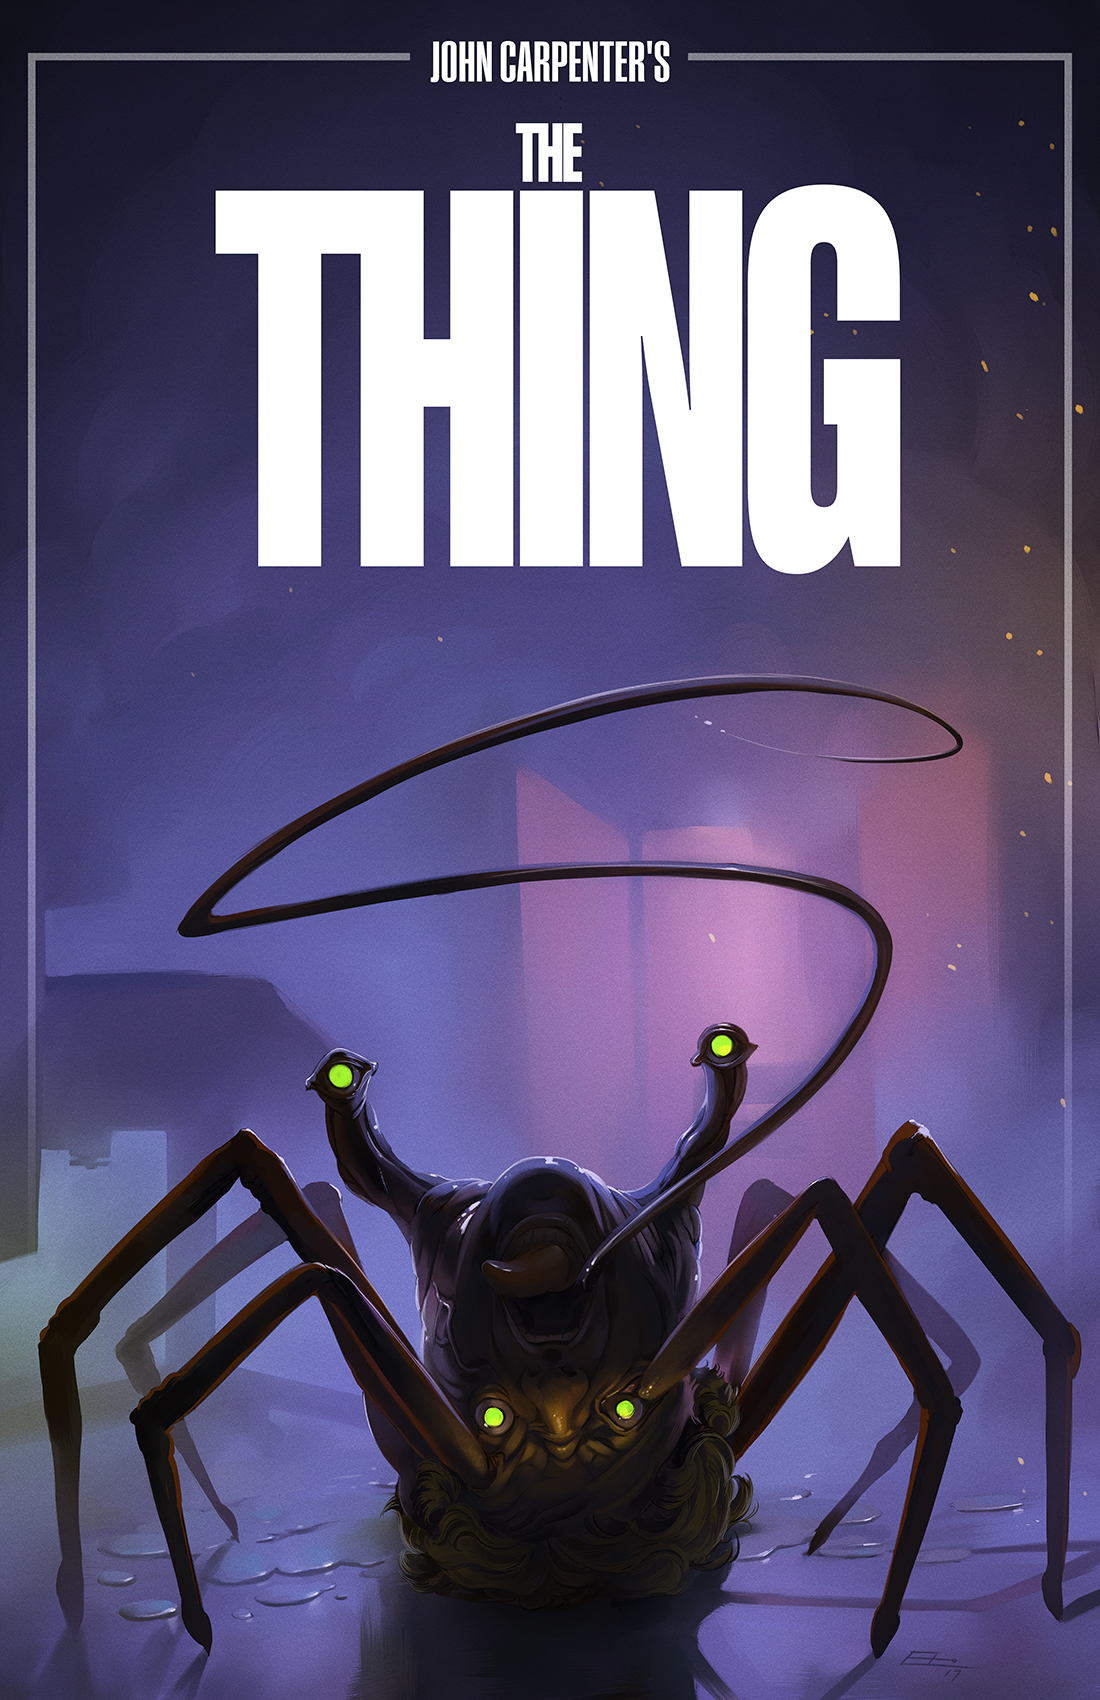 The 1 thing book. Нечто Постер.